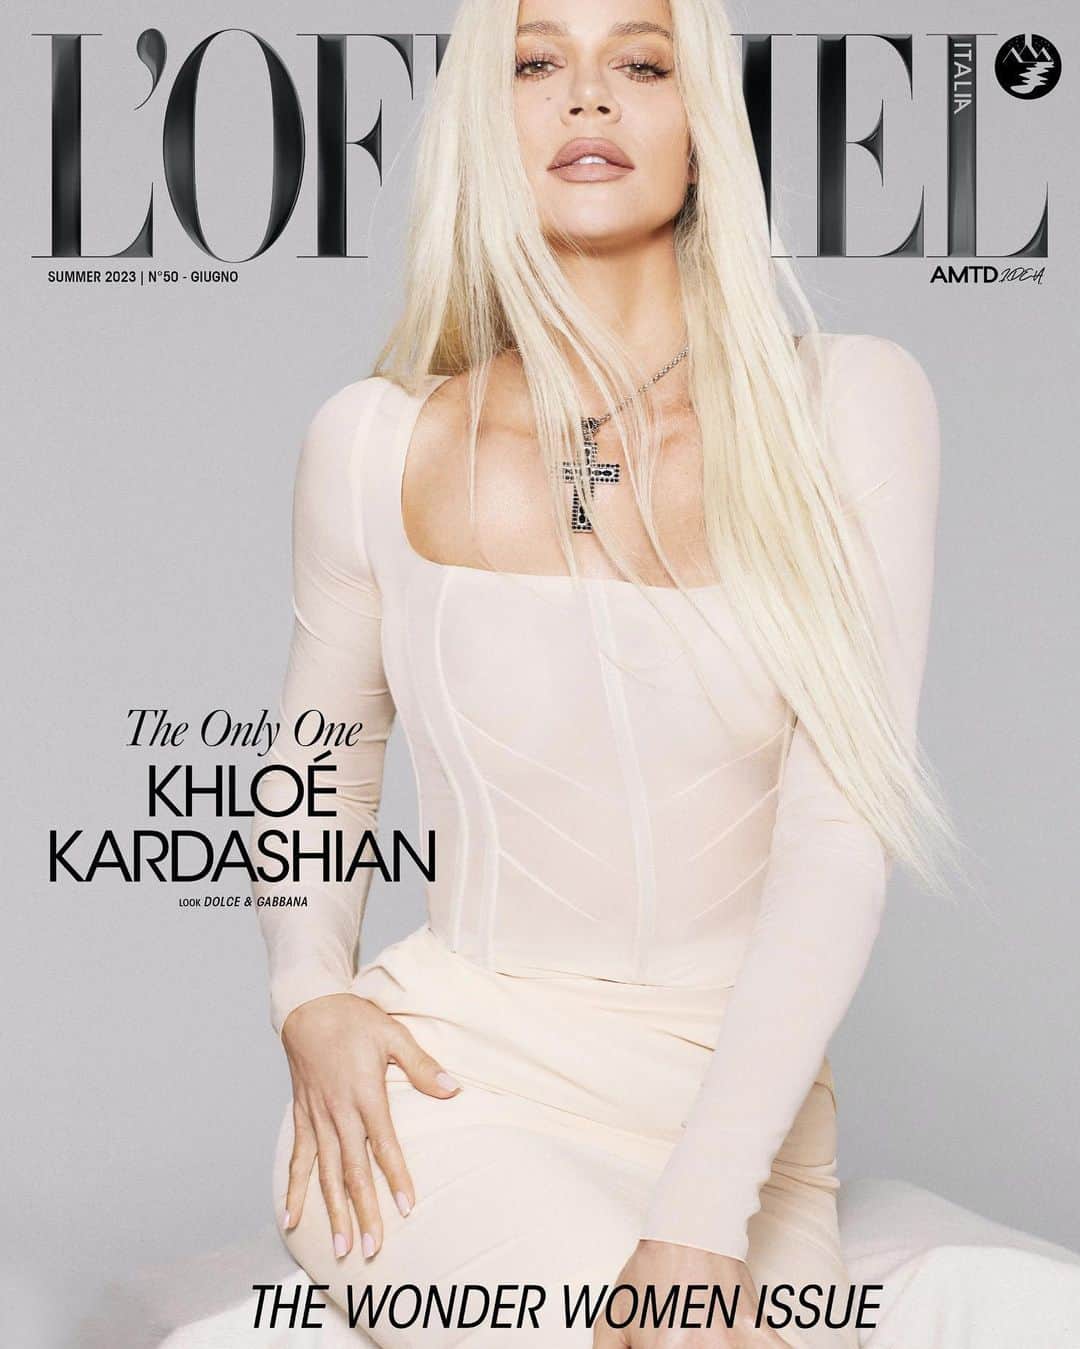 クロエ・カーダシアンさんのインスタグラム写真 - (クロエ・カーダシアンInstagram)「#THEWONDERWOMENISSUE - Khloé Kardashian for L’Officiel Italia Summer 2023 n.50  Photographed by Morelli Brothers, Styling and Interview by Kim Kardashian  KIM: I know that our surrogate experiences were very different and I'm so proud that you were honest about your feelings. I think it's really important for people to hear all sides of it. Would you ever recommend it for people struggling to conceive?  KHLOÉ: I am so incredibly thankful for your experience because you were with me every step of the way through mine. And I appreciate that I learned so much about surrogacy from you. I was unable to carry a second child due to health concerns, and I am incredibly grateful that we have surrogacy as an option. My situation was a very unique and hopefully a rare situation. The situation that I was in at that time caused a significant sense of detachment from my son. It's important to clarify that I don't want to detour anyone from trying surrogacy. My intention is to be honest about my experience and ensure that nobody feels alone. That's why I choose to be vulnerable and transparent, even when it hurts. I want others to know they have an ally and that it's ok to feel a certain way.  To read the full interview, click the link in bio.  Team credits:  Talent @khloekardashian in @dolcegabbana Editor in Chief Giampietro Baudo @giampietrobaudo Fashion director Giulio Martinelli @therealgiuliomartinelli Photography Morelli Brothers @morellibrothers Styling and Interview by Kim Kardashian @kimkardashian Fashion market editor Luca Falcioni @luca_falcioni_ Hair Jesus Guerrero @jesushair at @thewallgroup Make up Ash K Holm @ash_kholm at @thewallgroup Manicure Zola Ganzorigt @nailsbyzola Pedicure Mille  Prop design Marianne Lu Producer Creative P Studio @creativepstudio Tailor Mia Paranto @mdtailoring Photo assistants James Goethals and Andrew Harless Stylist assistant Carolina Levi @carolinalevi_  #KhloeKardashian #Cover #DolceGabbana #KK #KimKardashian #LOfficiel #LOfficielItalia #CoverStar」6月17日 1時59分 - khloekardashian